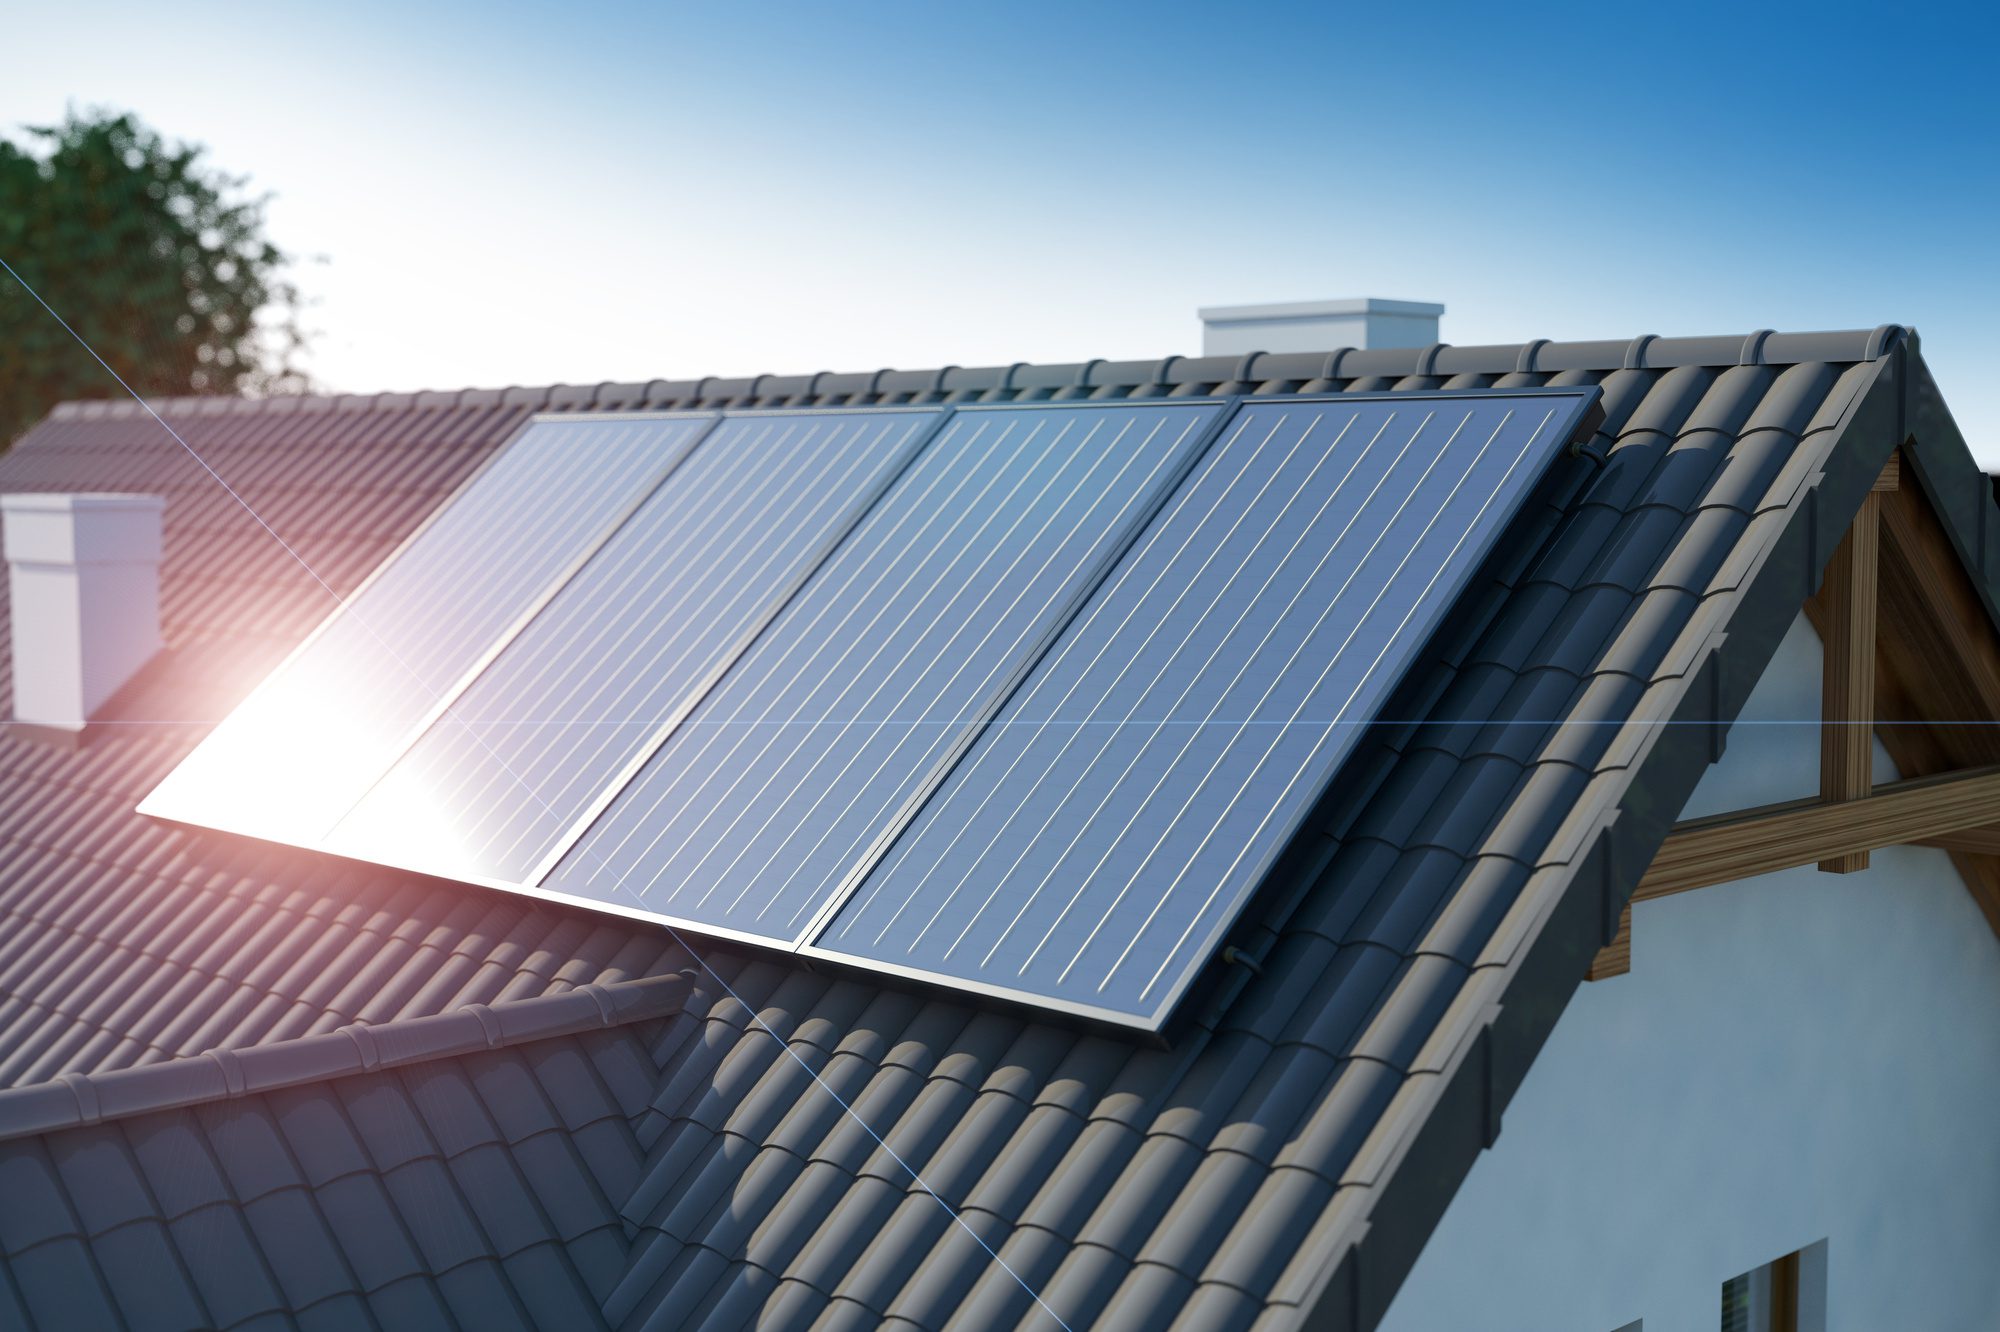 How Do Solar Panels Work? The Technology You Need to Know